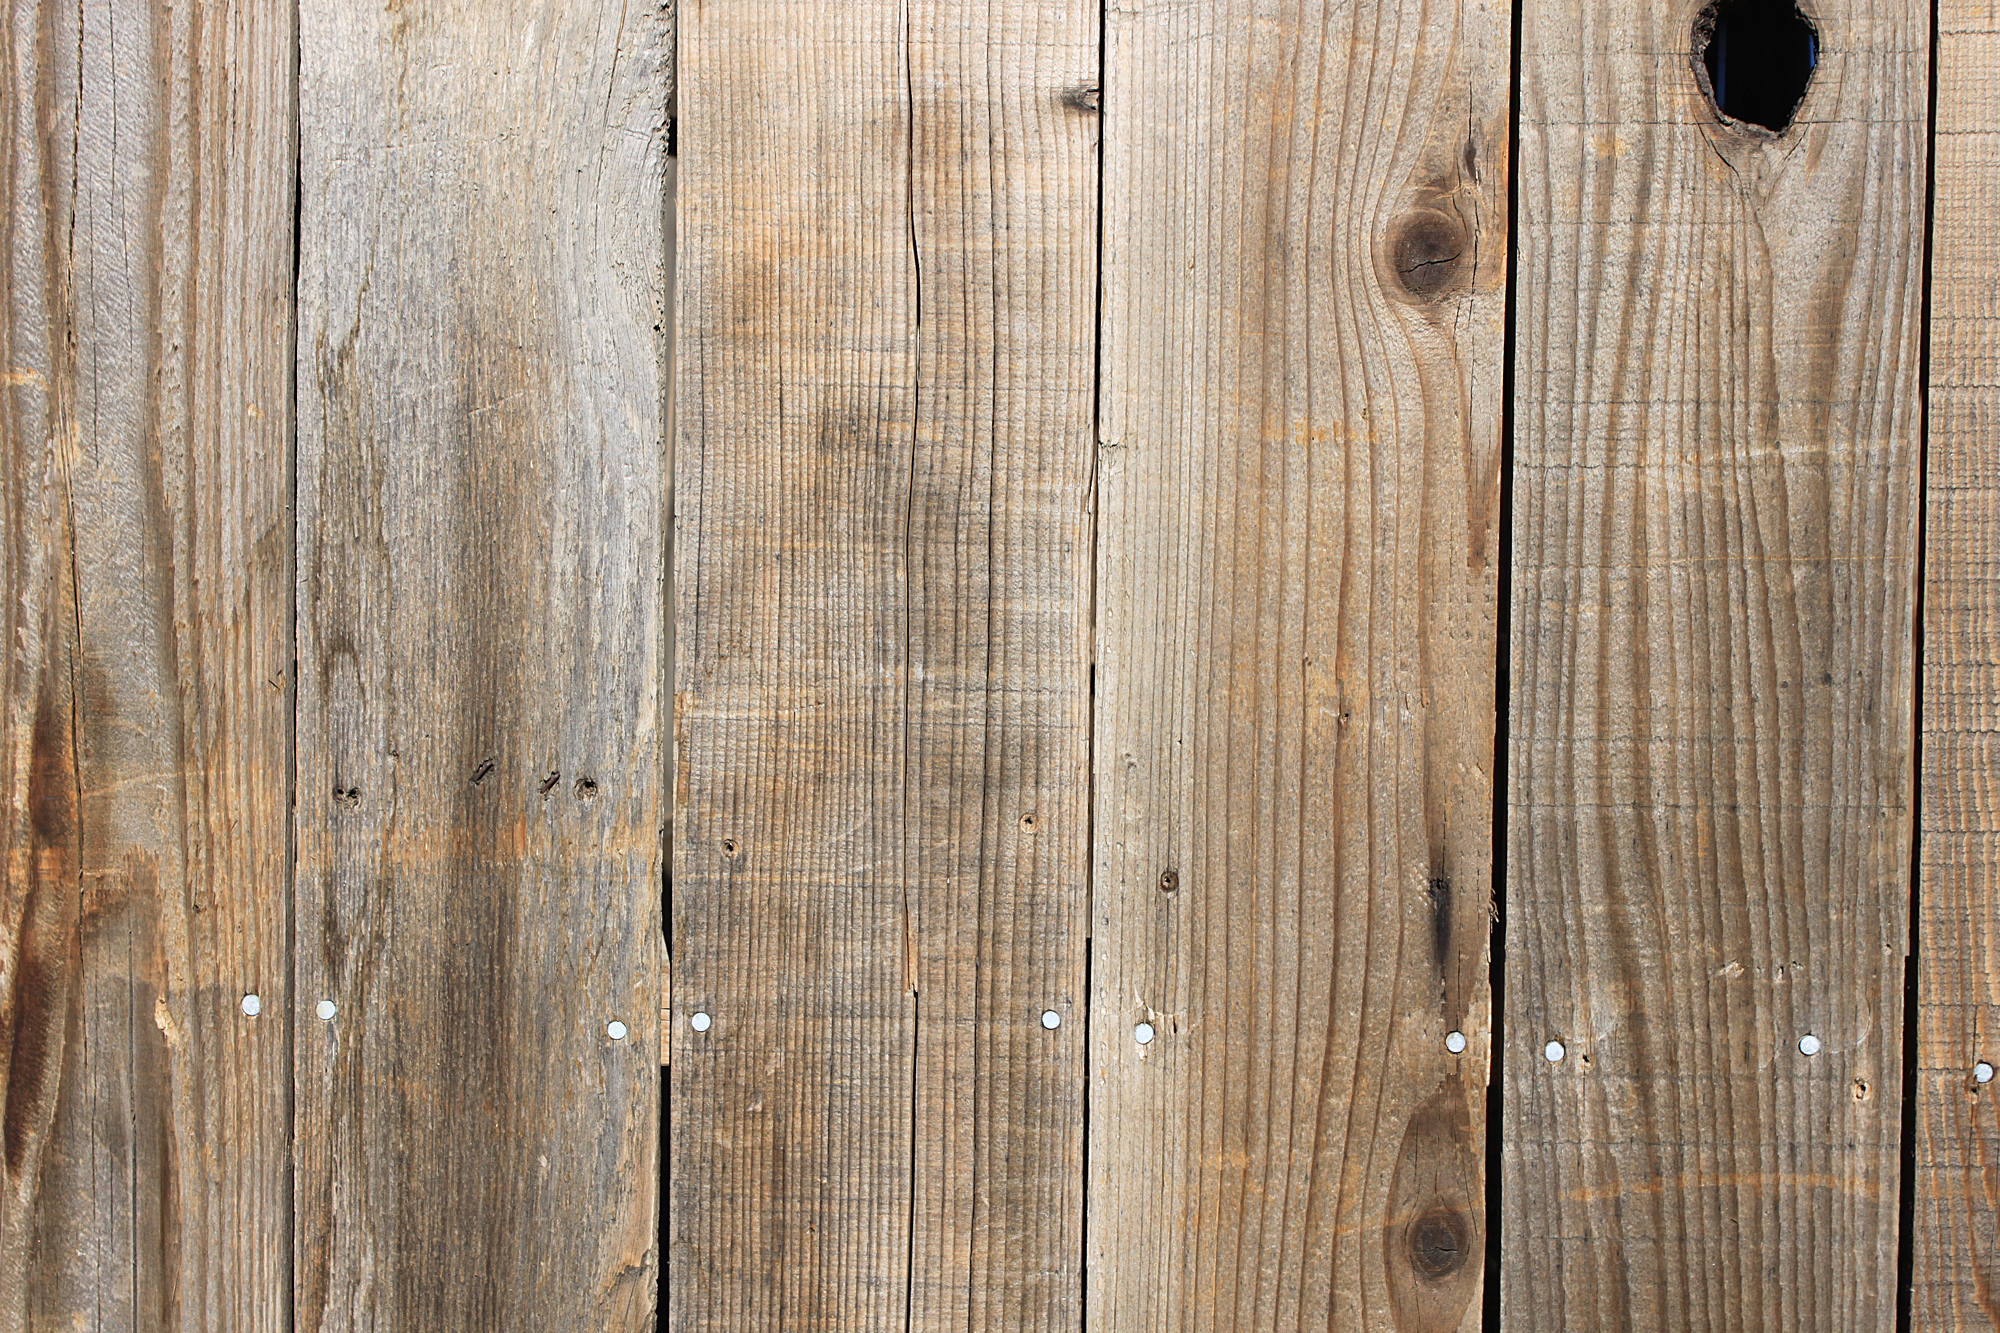 Totally FREE High Res Rustic Wooden Textures and Graphic Elements 2000x1333